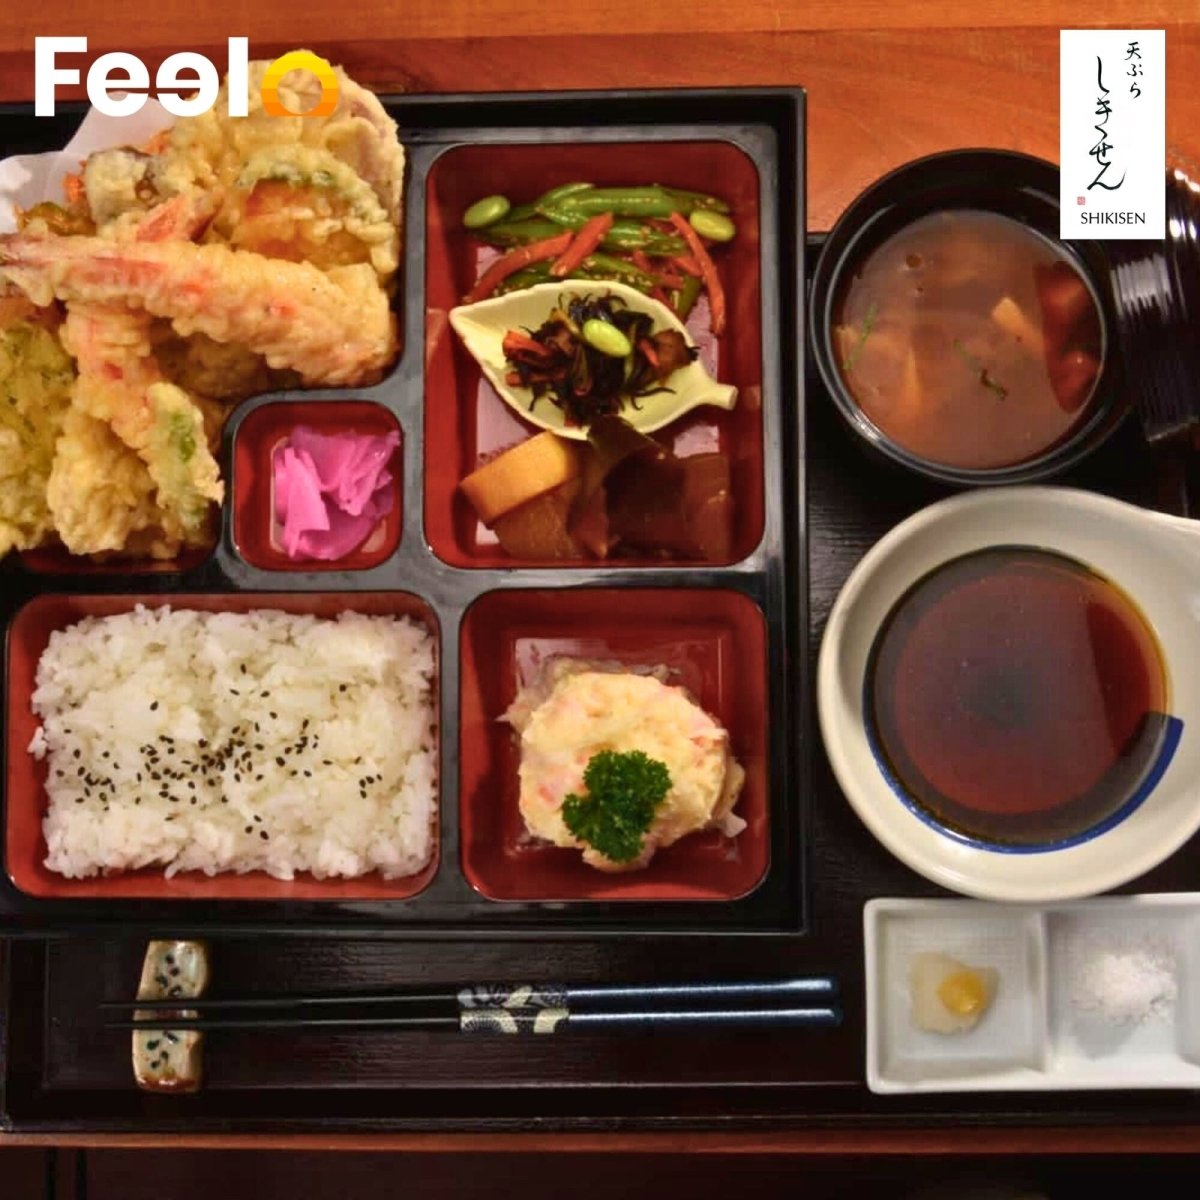 2 Authentic Japanese Bento Meals + 6 Pieces of Tuna Sushi for 2 People - Shikisen Japanese Restaurant, Colombo 03 | Feelo